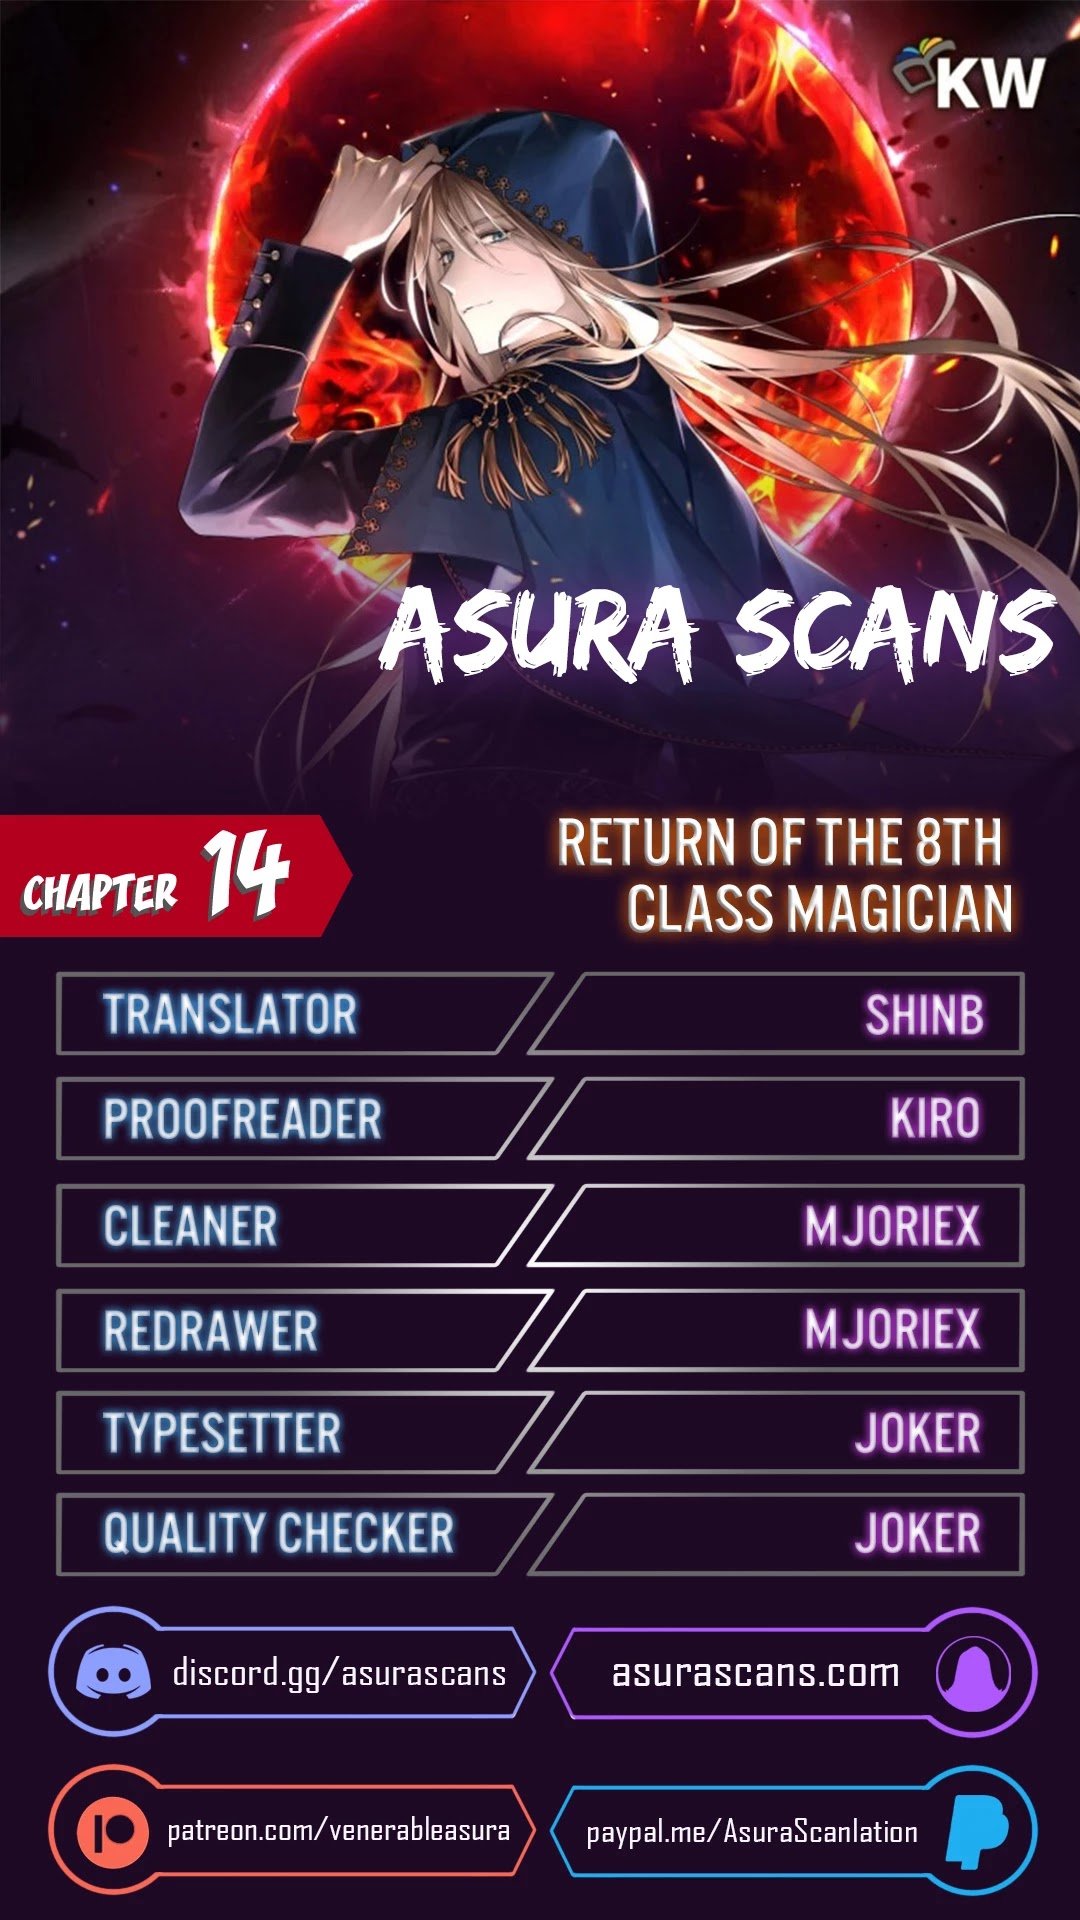 Return of the 8th class Magician chapter 14